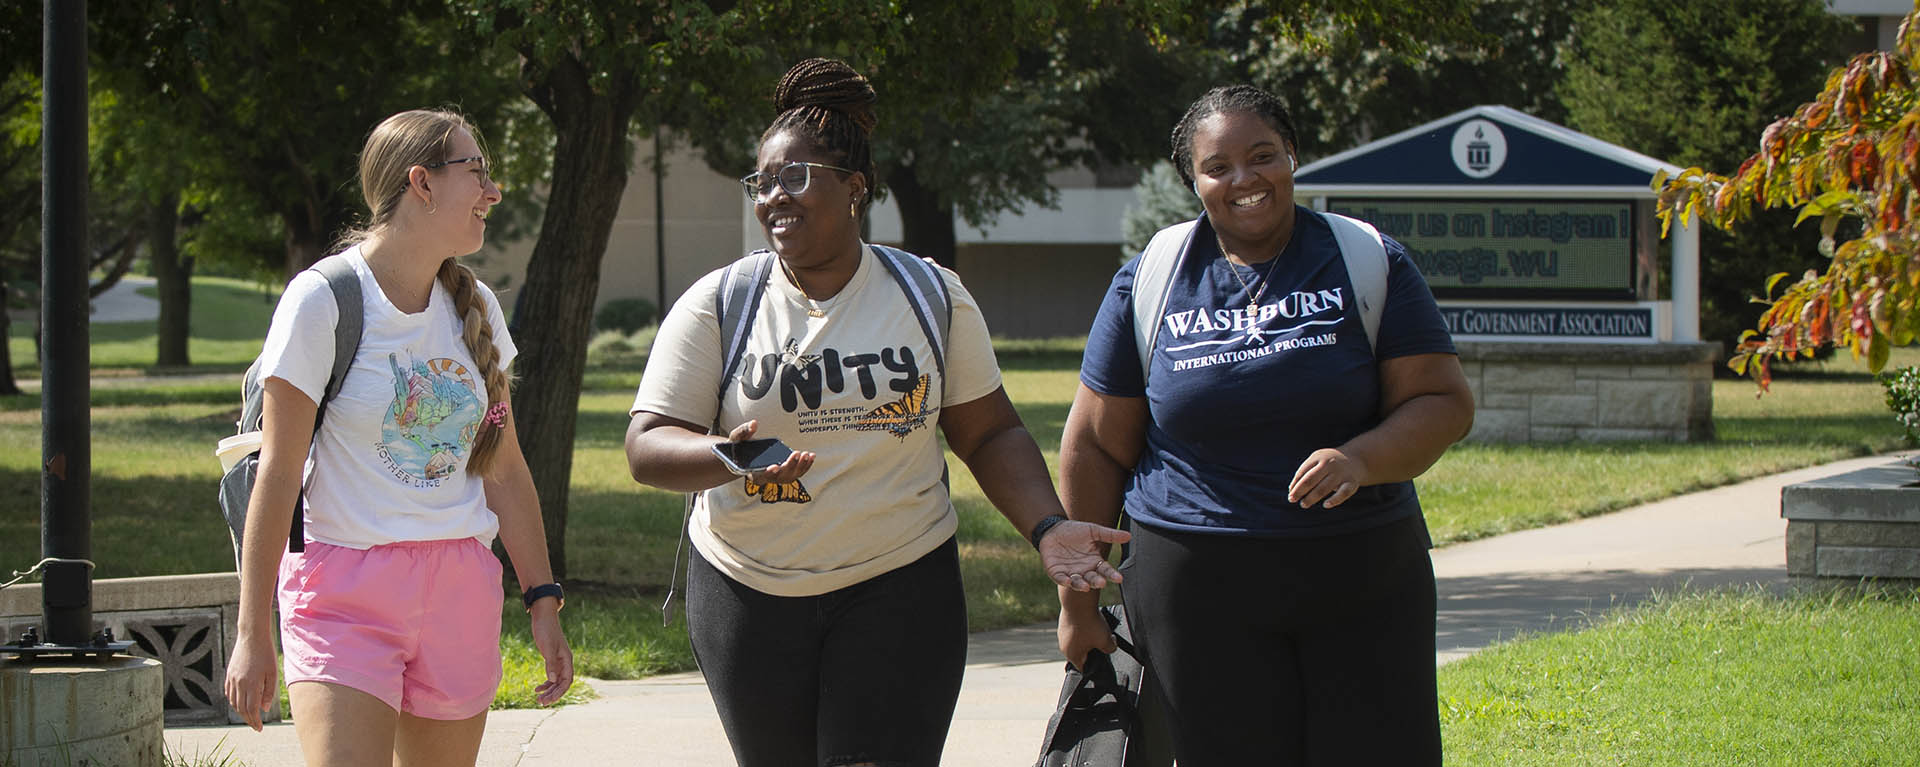 Three Washburn students smile and chat while walking to class on campus.